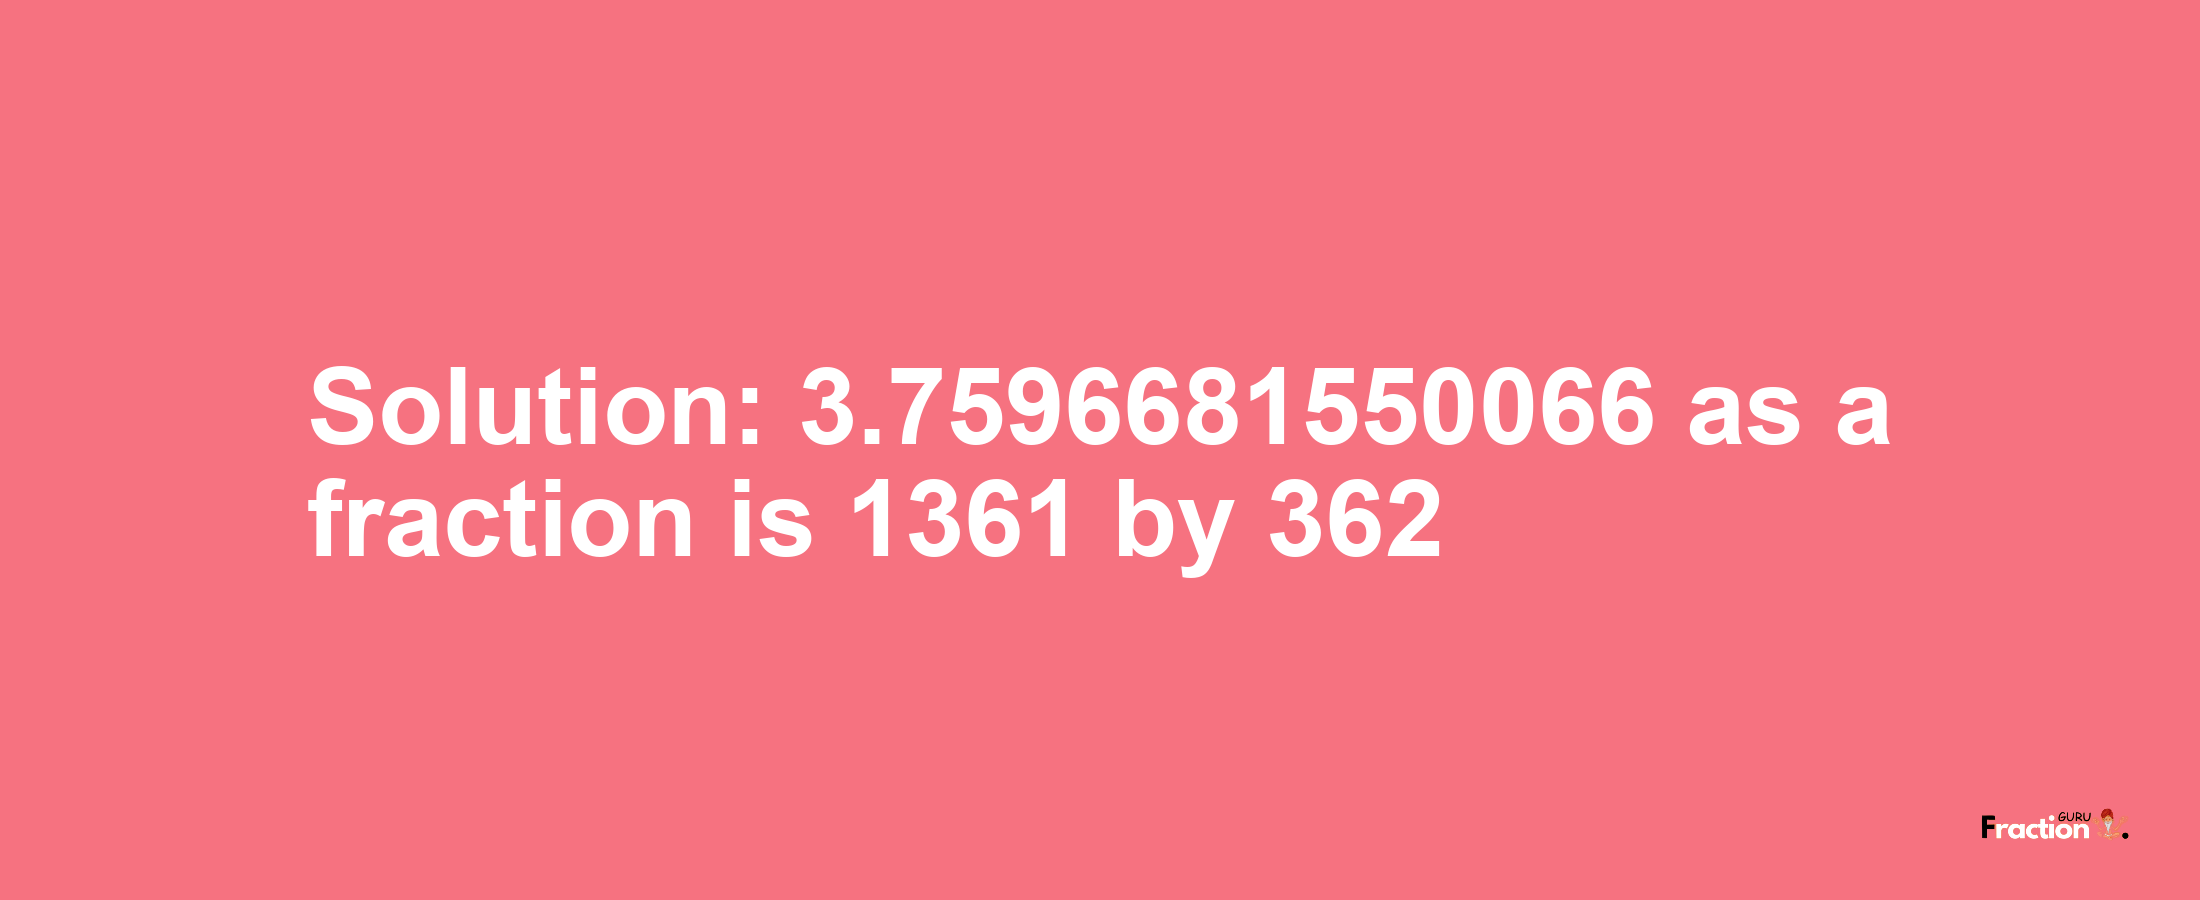 Solution:3.7596681550066 as a fraction is 1361/362